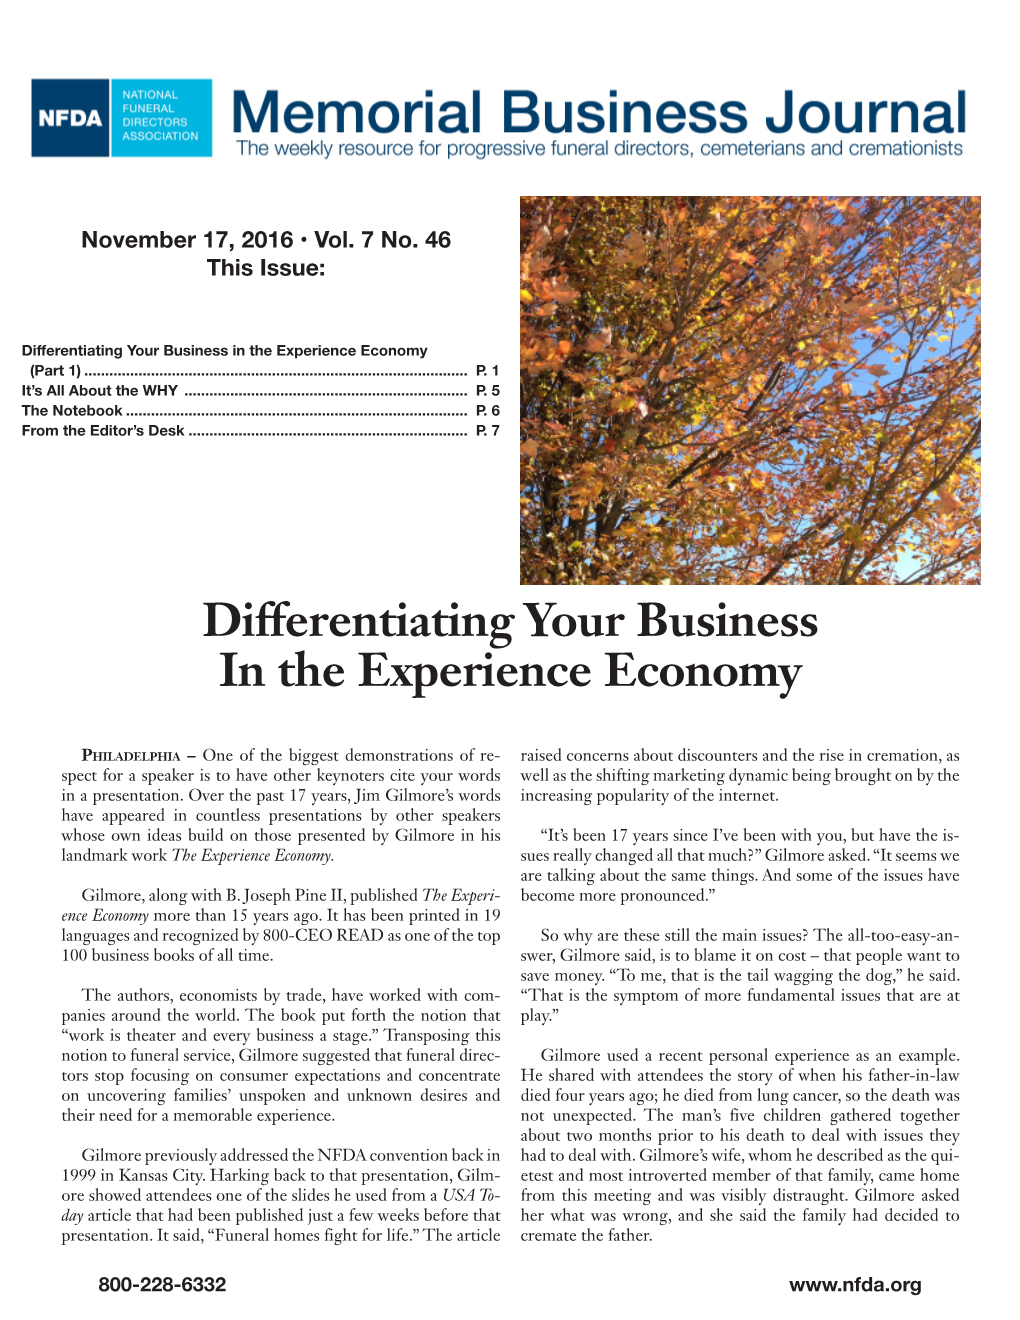 Differentiating Your Business in the Experience Economy (Part 1)